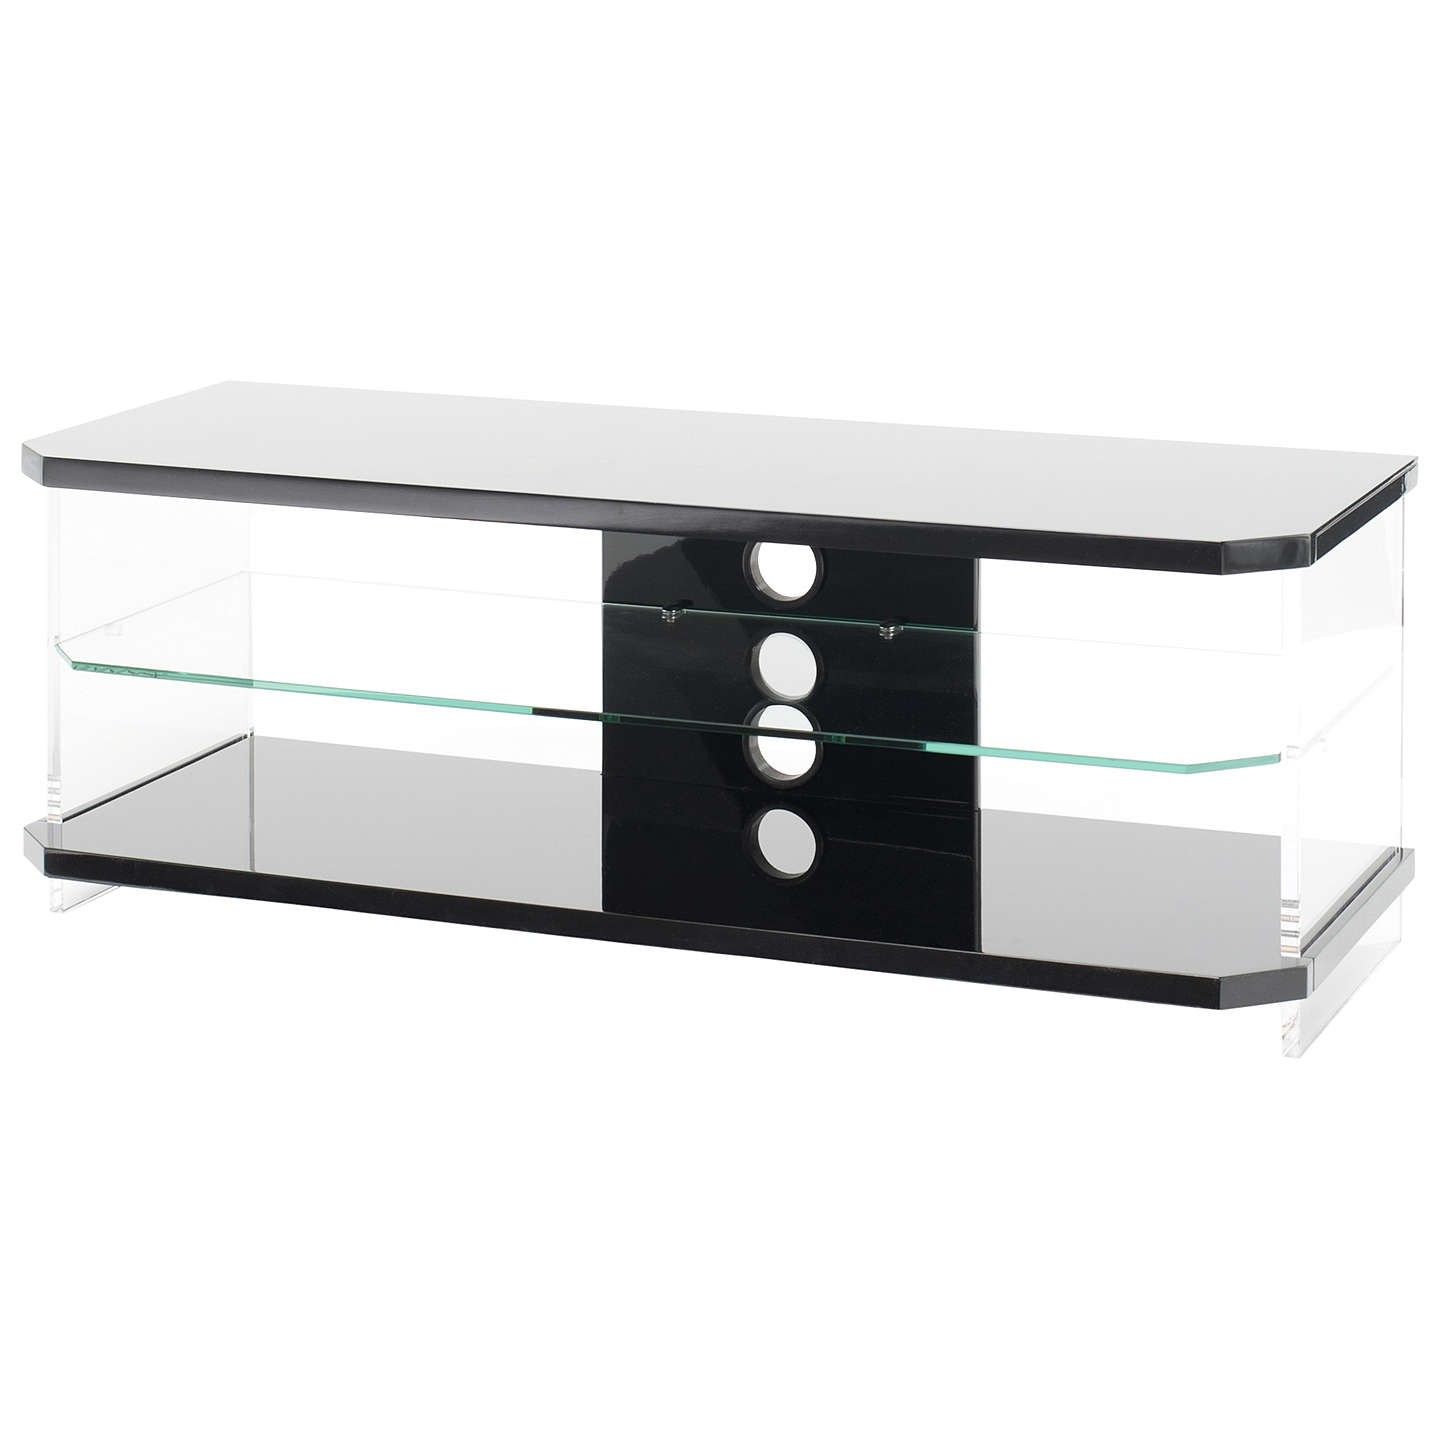 Techlink Tv Stands Pertaining To Popular Find Out Full Gallery Of Lovely Techlink Tv Stand – Displaying # (View 11 of 20)